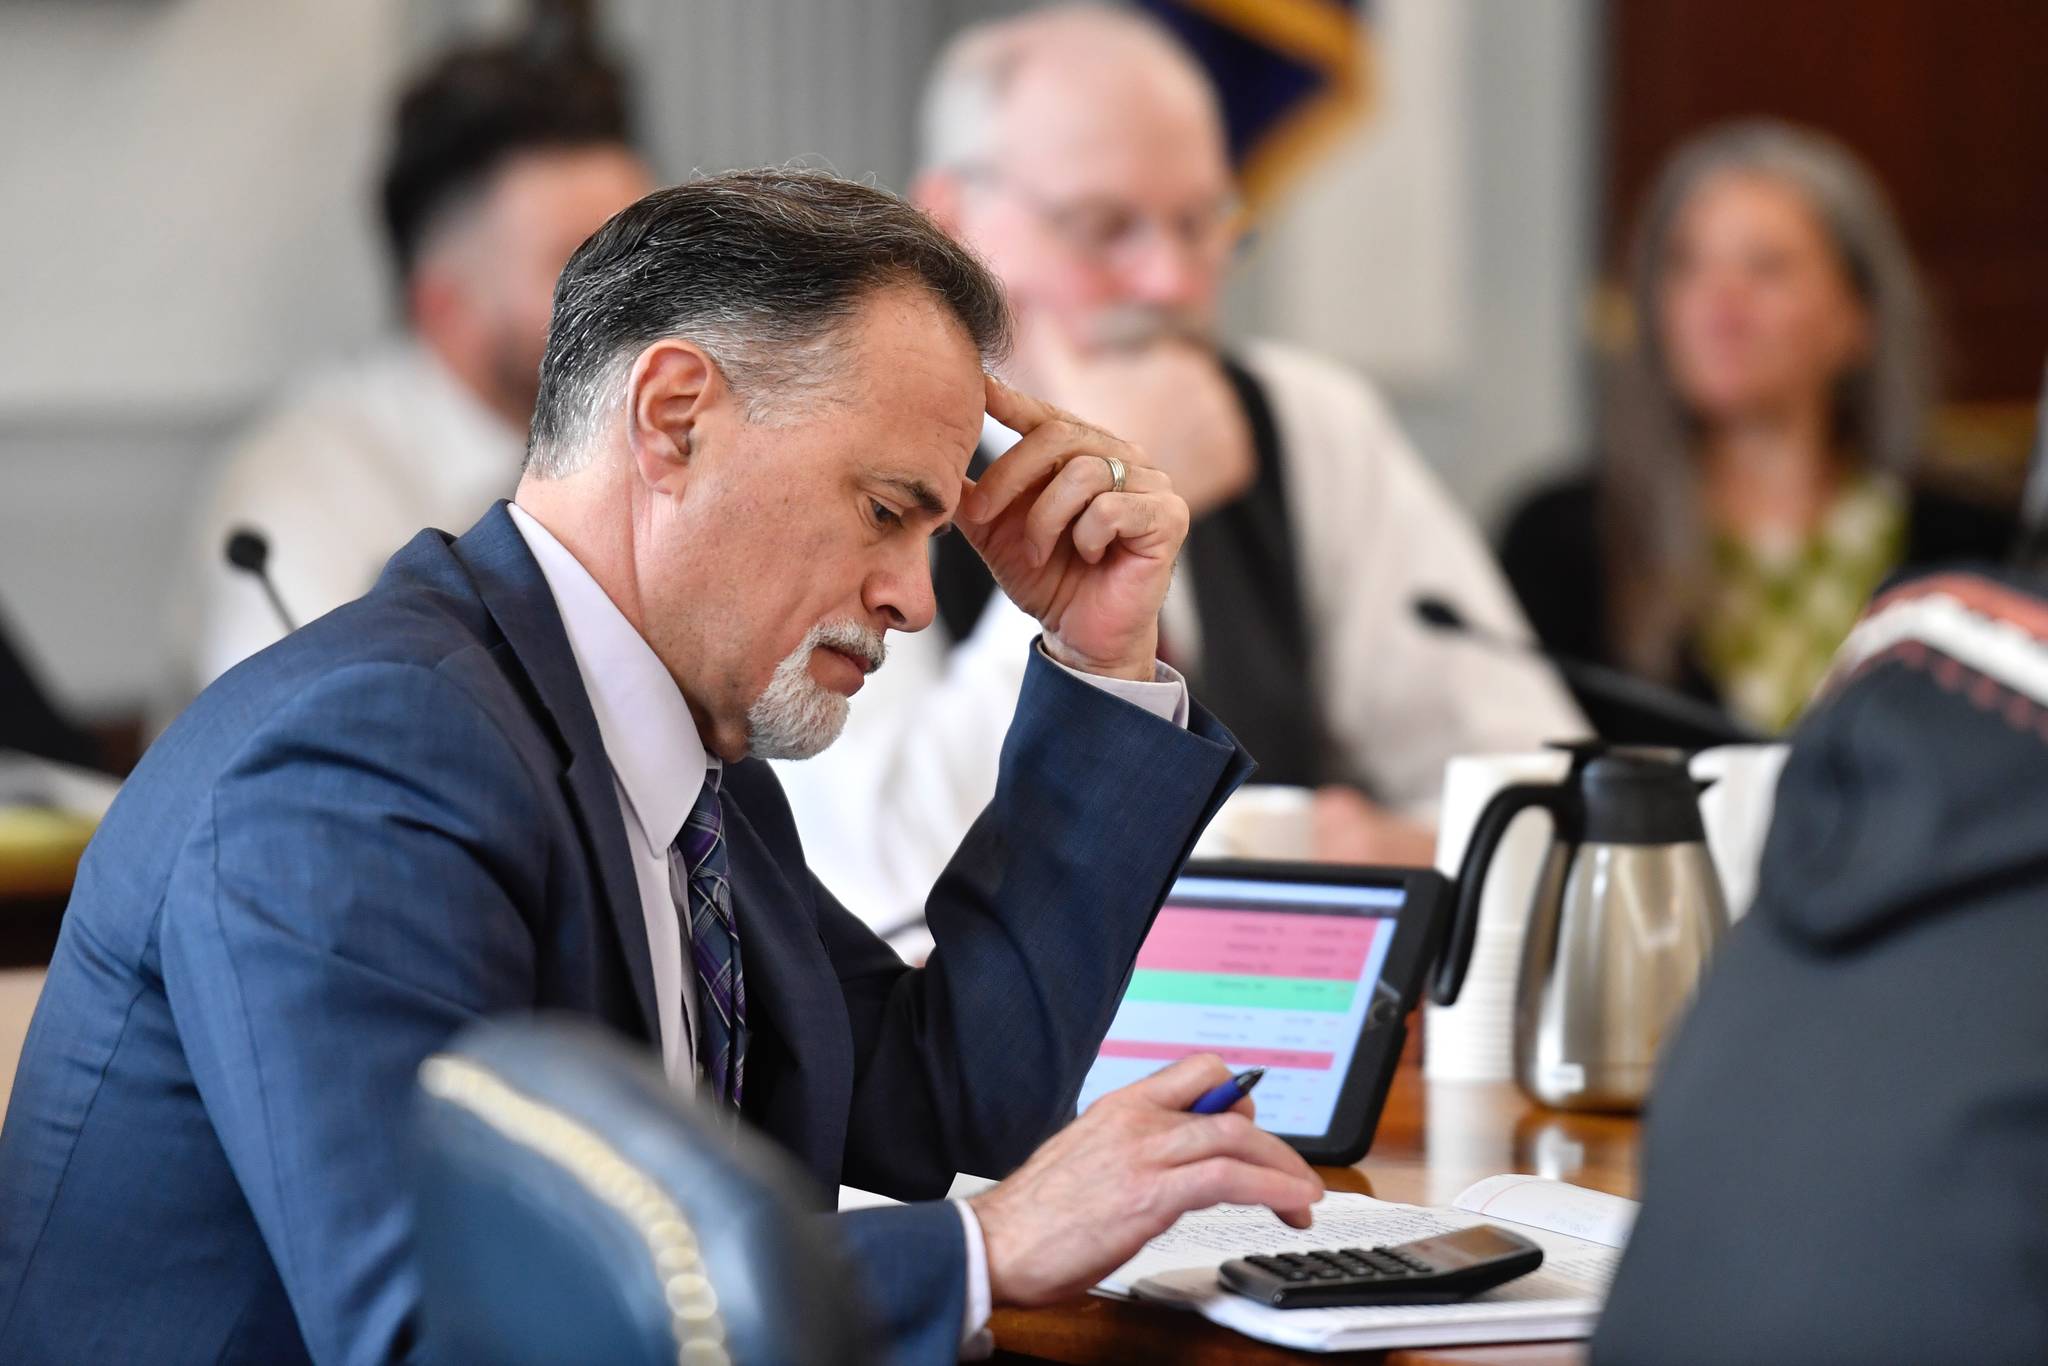 Sen. Peter Micciche, R-Soldotna, works a calculator as he and Sen. Bert Stedman, R-Sitka, listen to public testimony on the state budget in the Senate Finance Committee hearing on Friday, April 12, 2019. (Michael Penn | Juneau Empire)